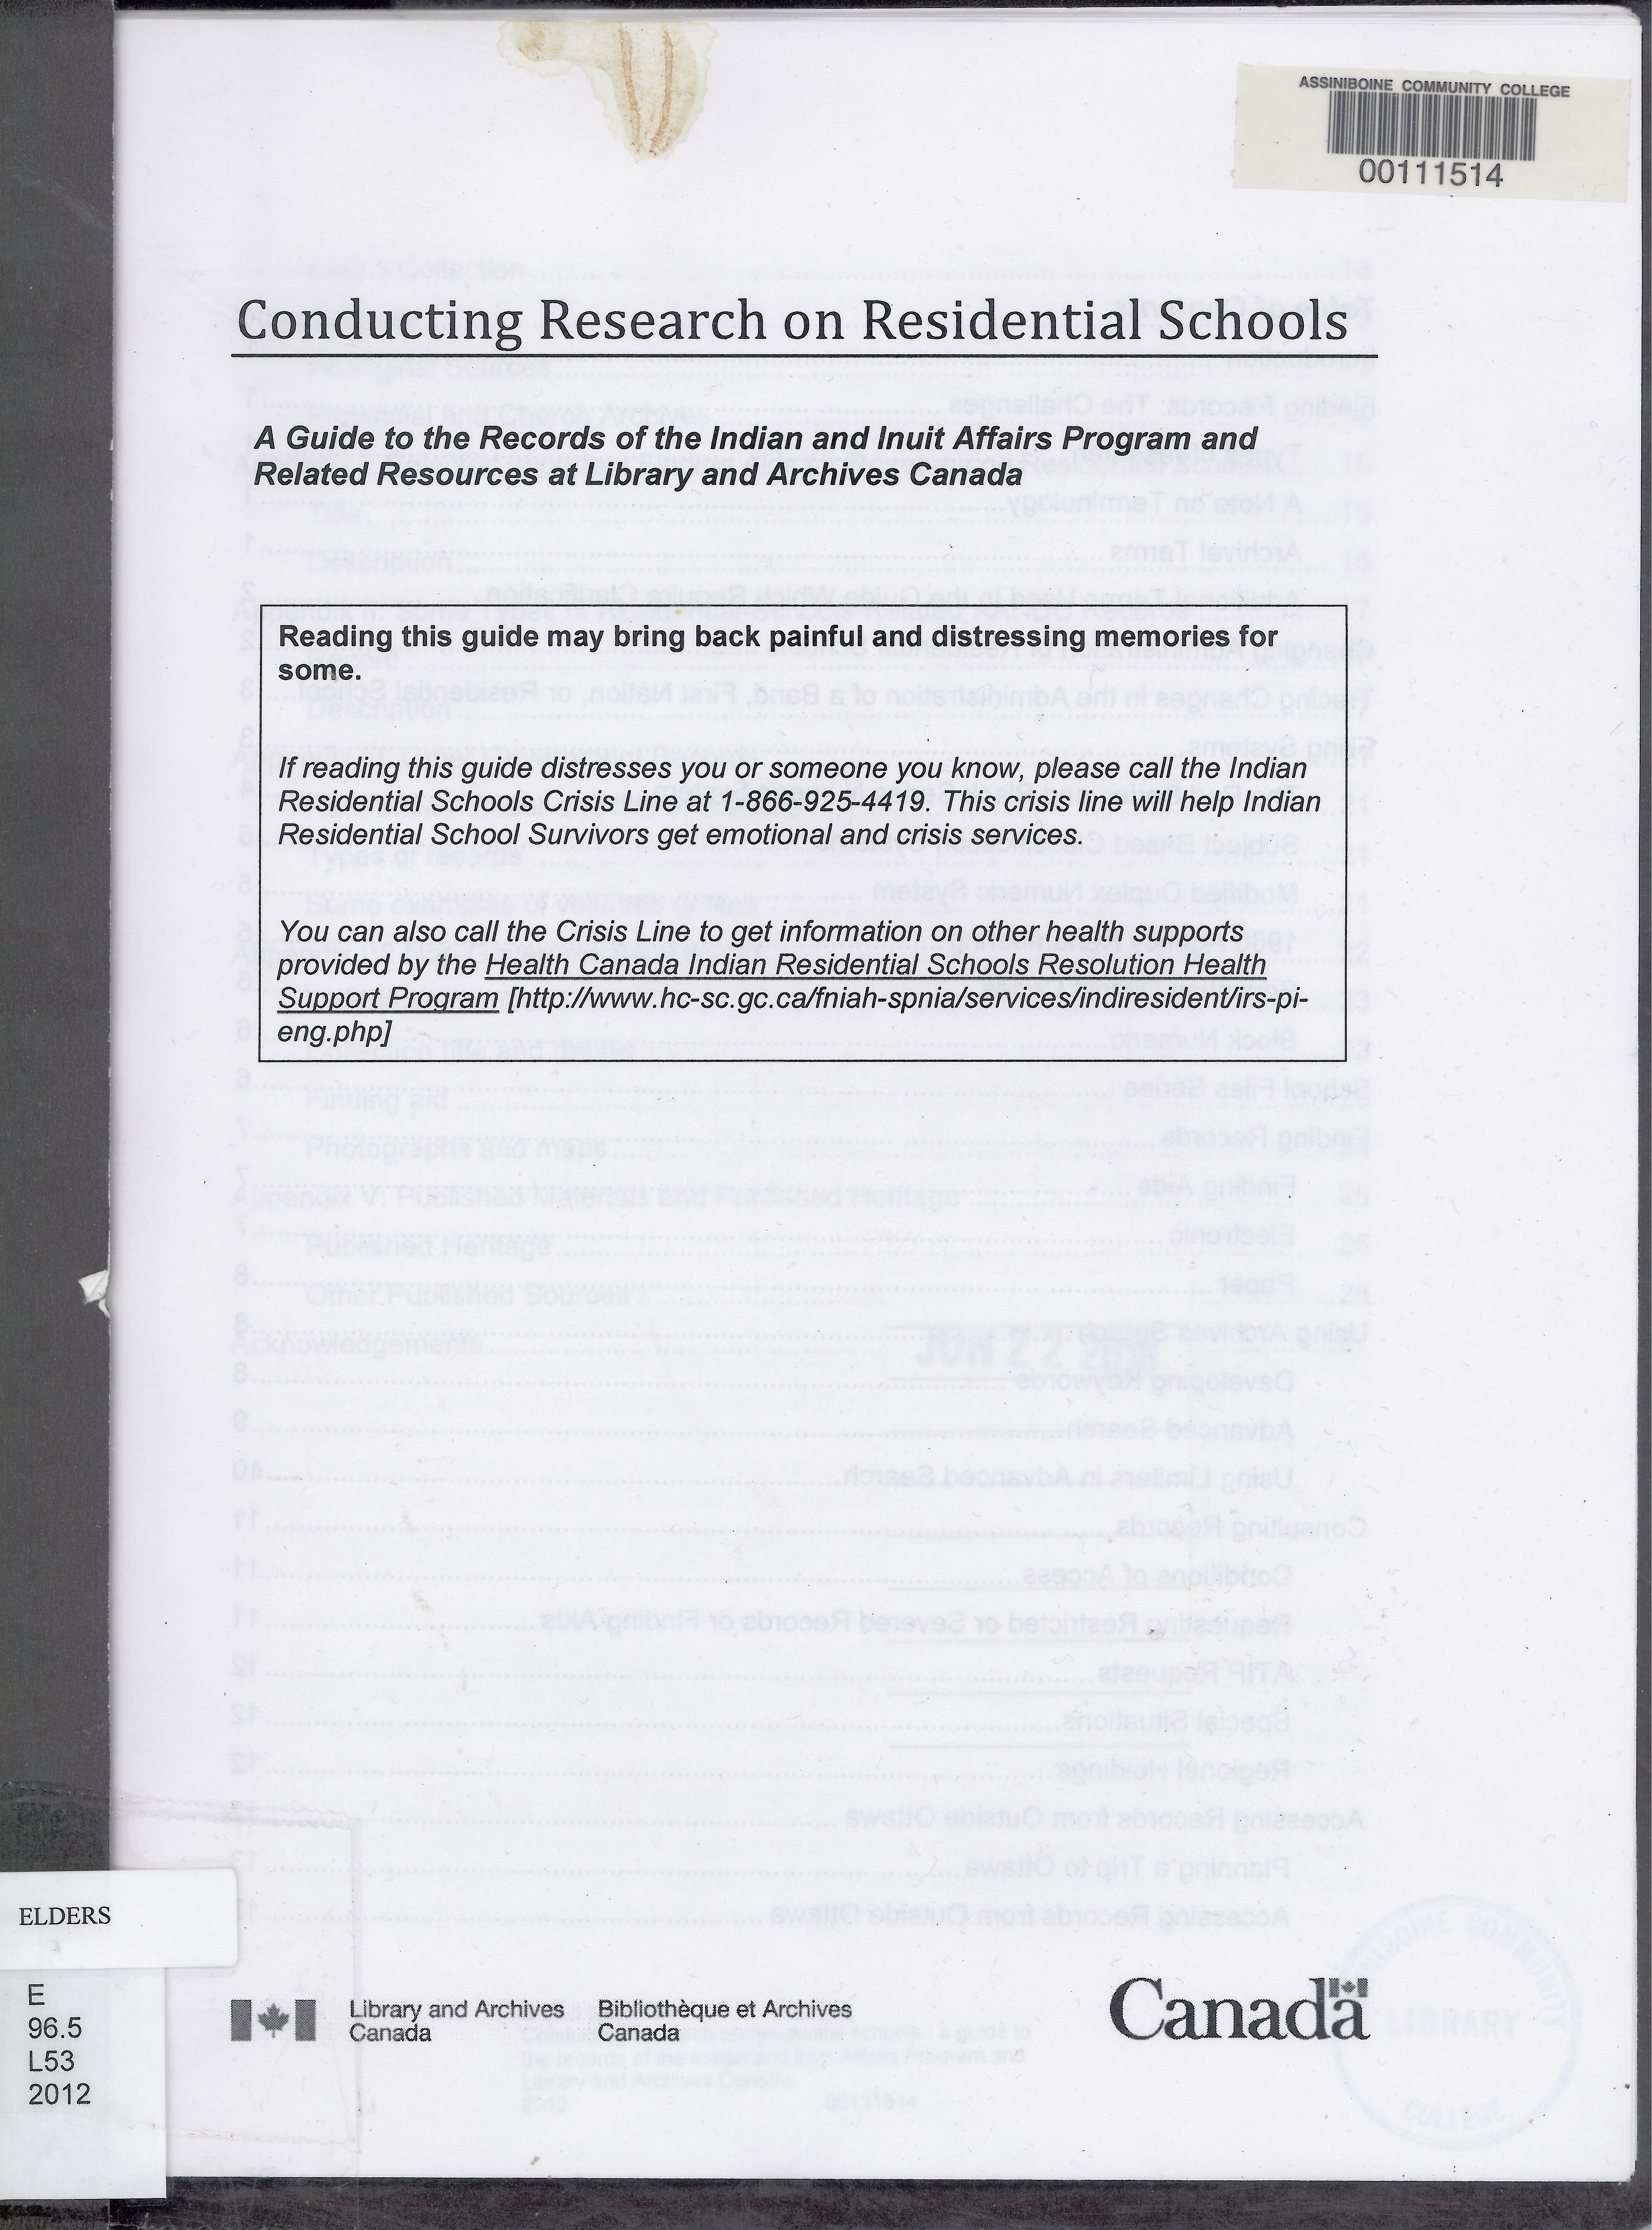 Conducting research on residential schools : a guide to the records of the Indian and Inuit Affairs Program and related resources of Library and Archives Canada